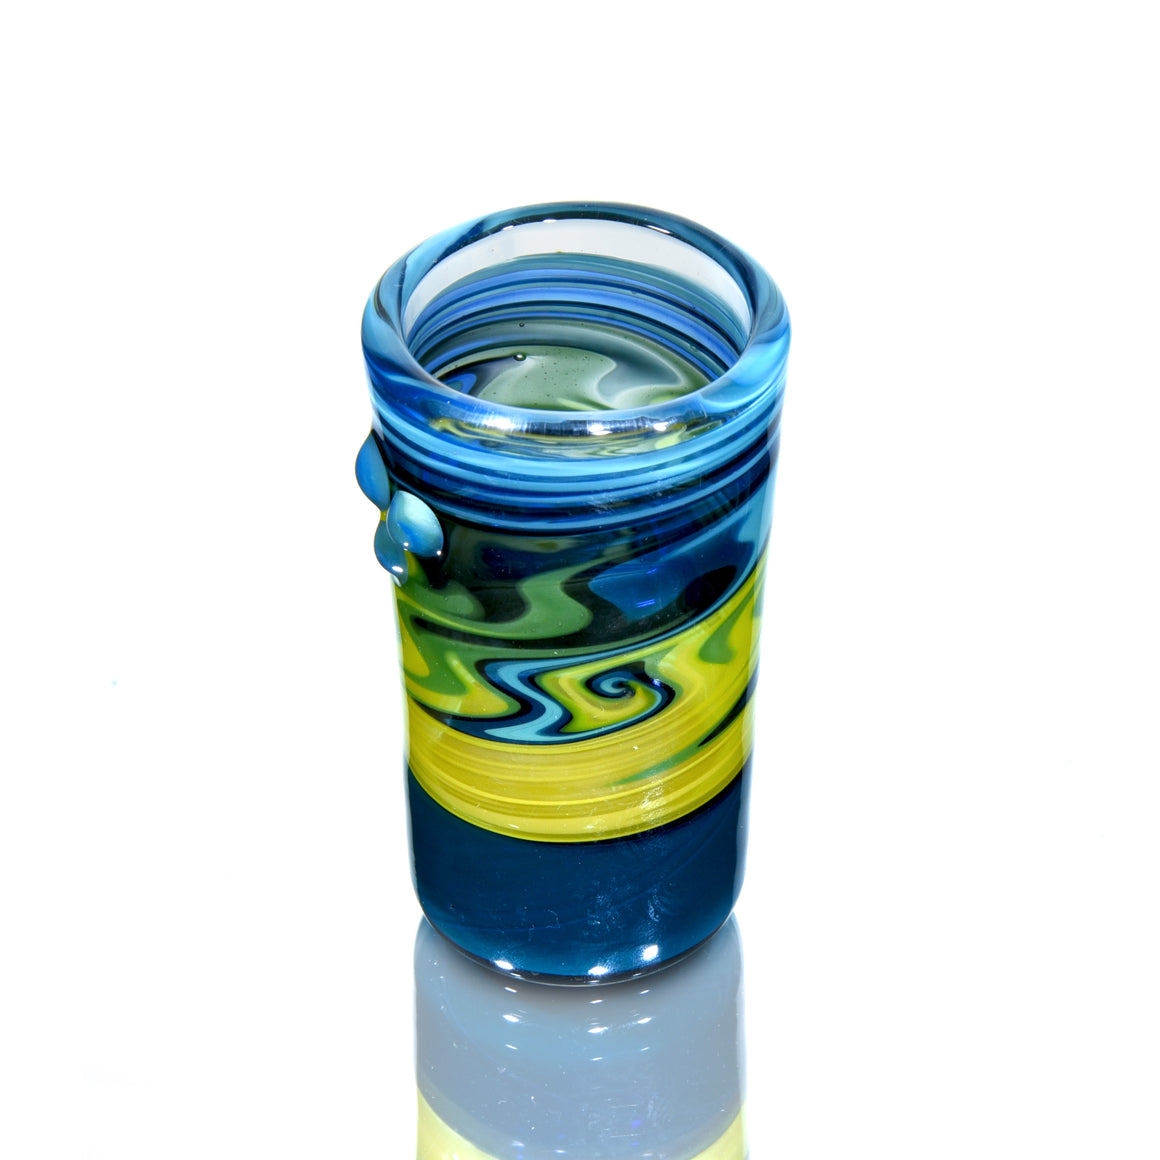 Fully-worked Shot Glass